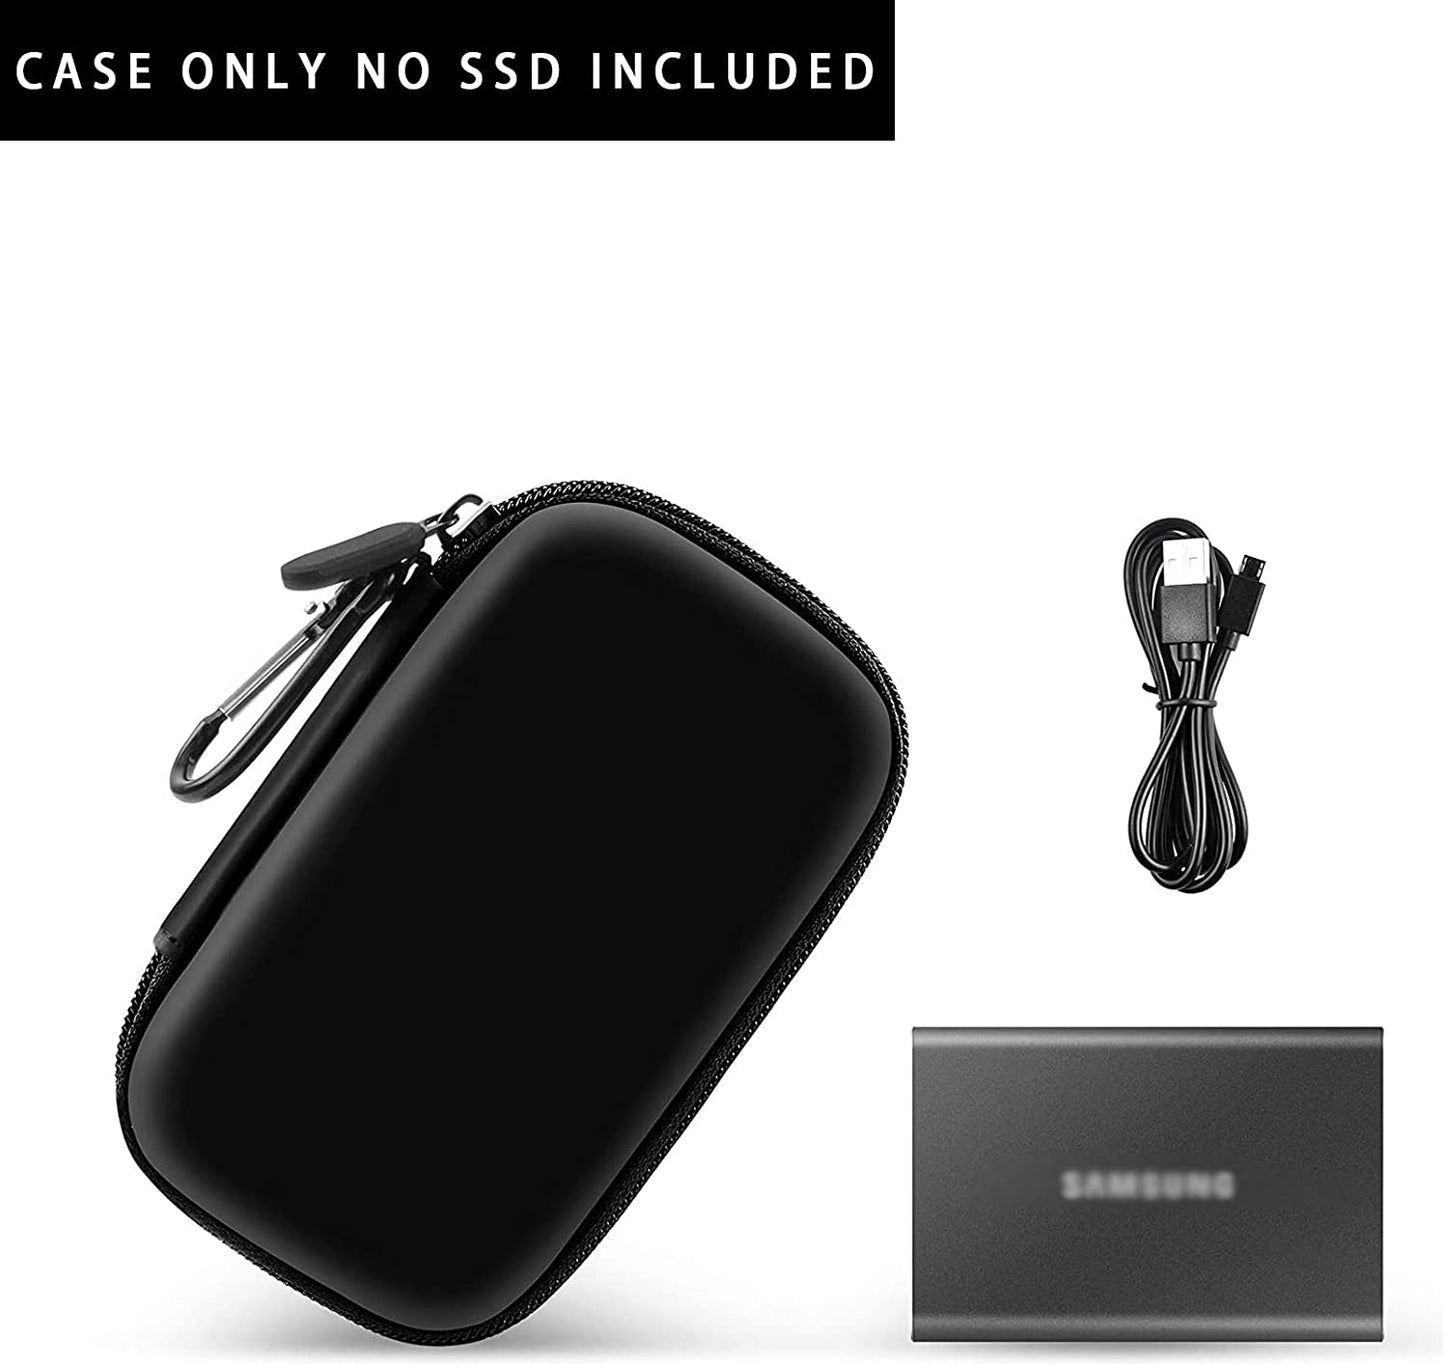 Case Compatible with Samsung T7/ T7 Touch Portable SSD 1TB 2TB 500GB USB 3.2 External Solid State Drive, Travel Carrying Storage Organizer Fits for USB Cables and More Accessories (Black)